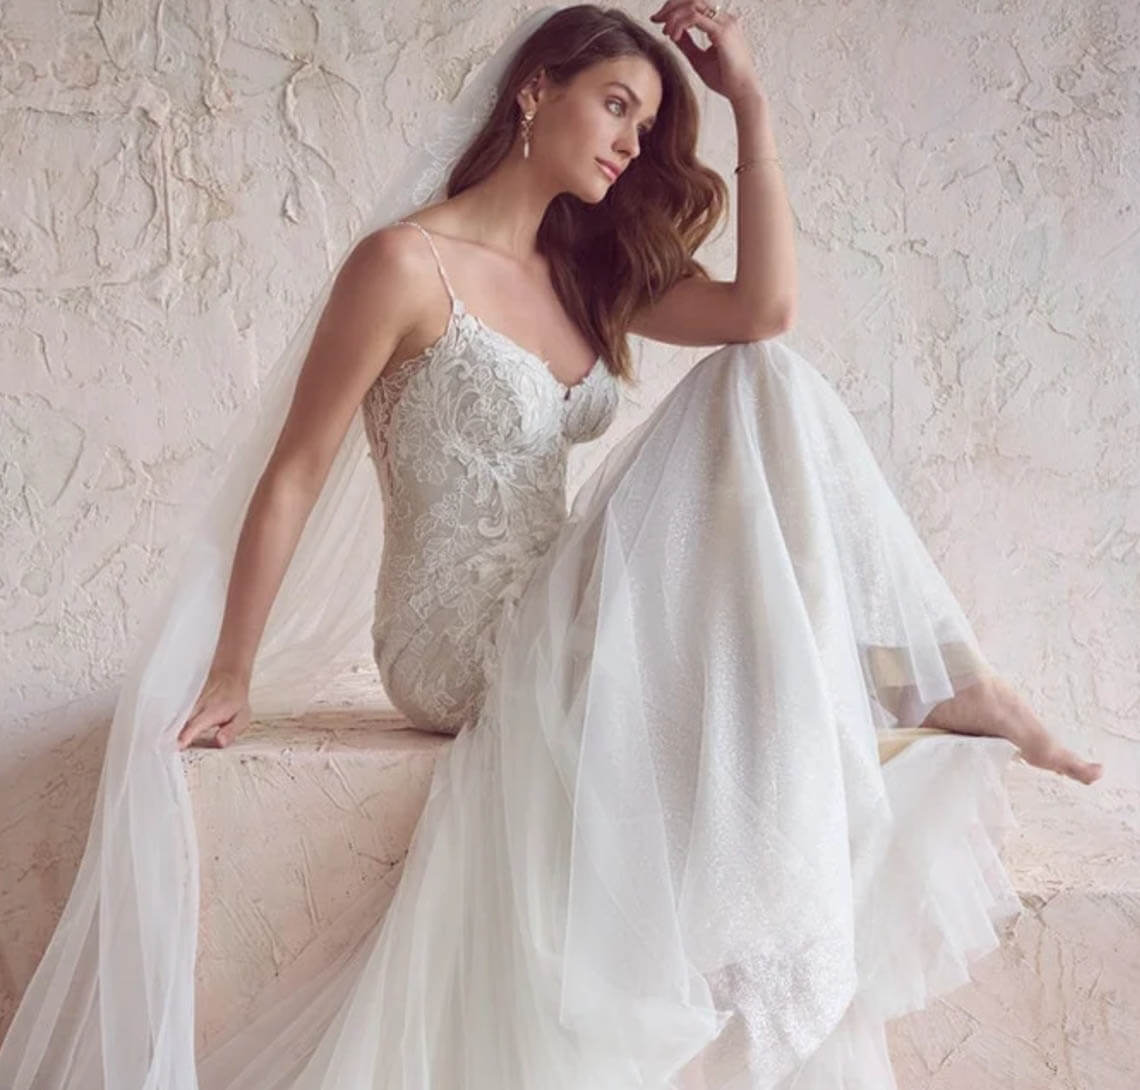 Model wearing a white gown by Maggie Sottero. Mobile image